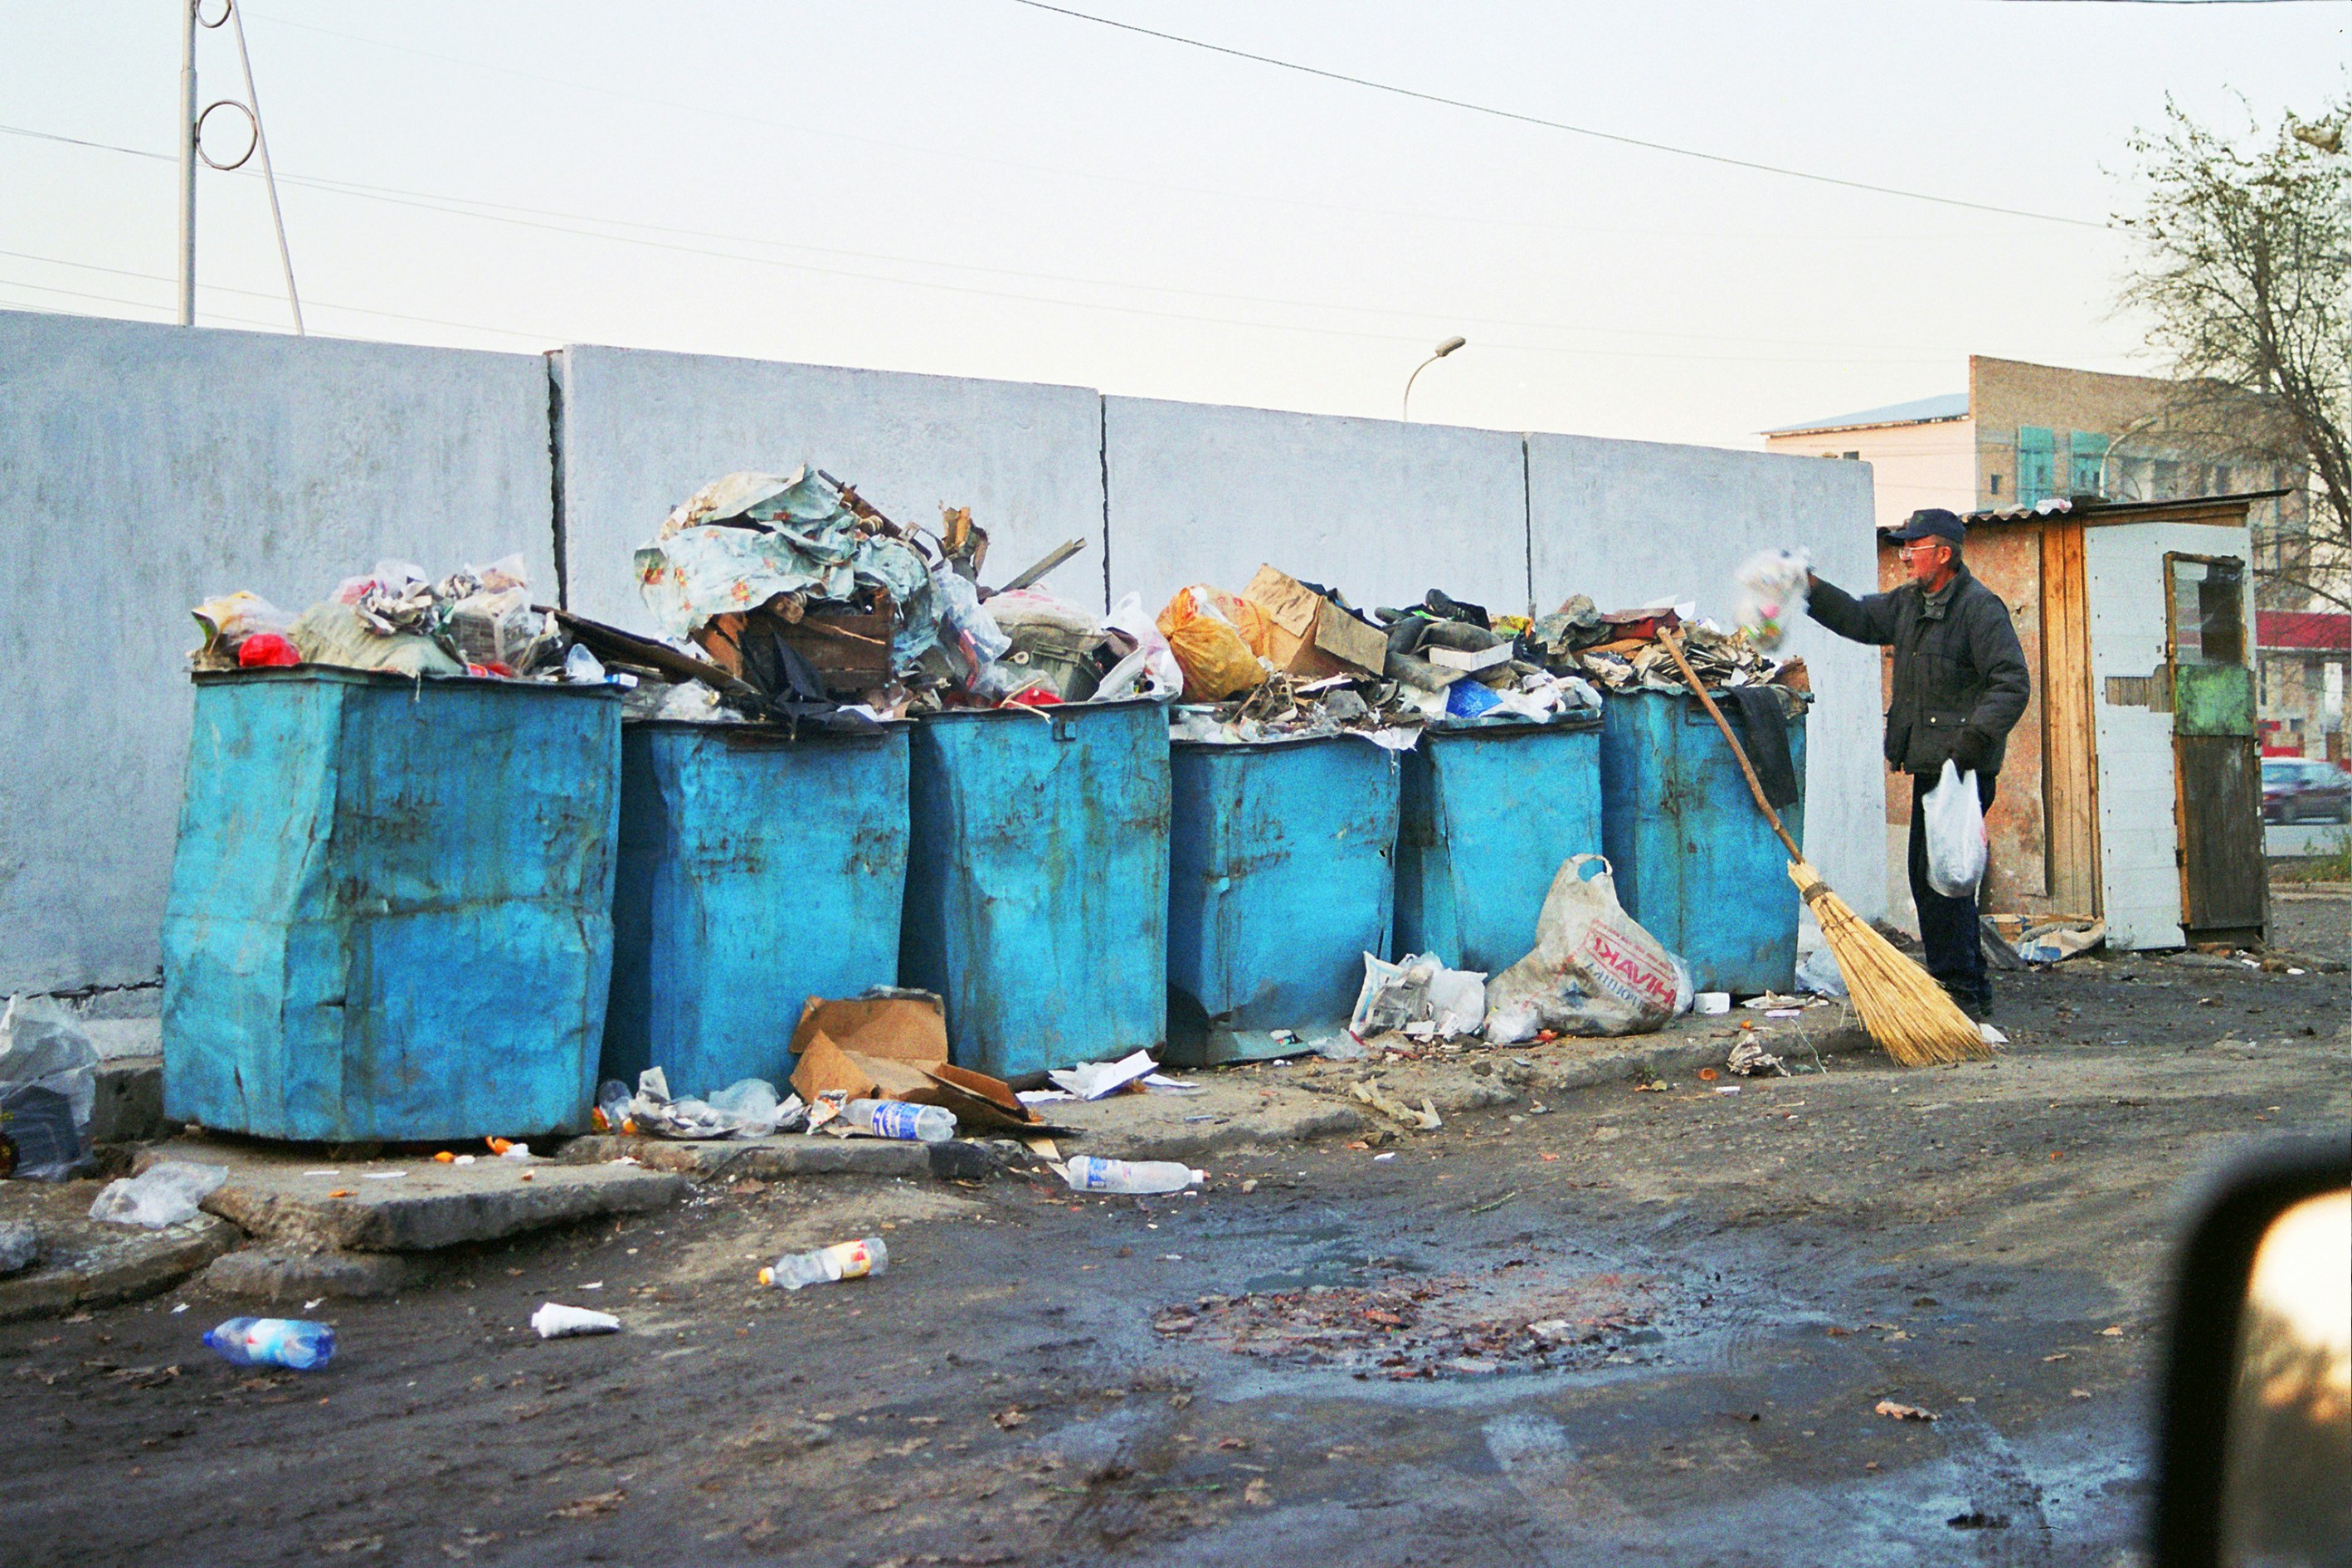 A line of six large blue bins filled to the brim with rubbish. An adult is pictured on the far right placing a bag in the bin.